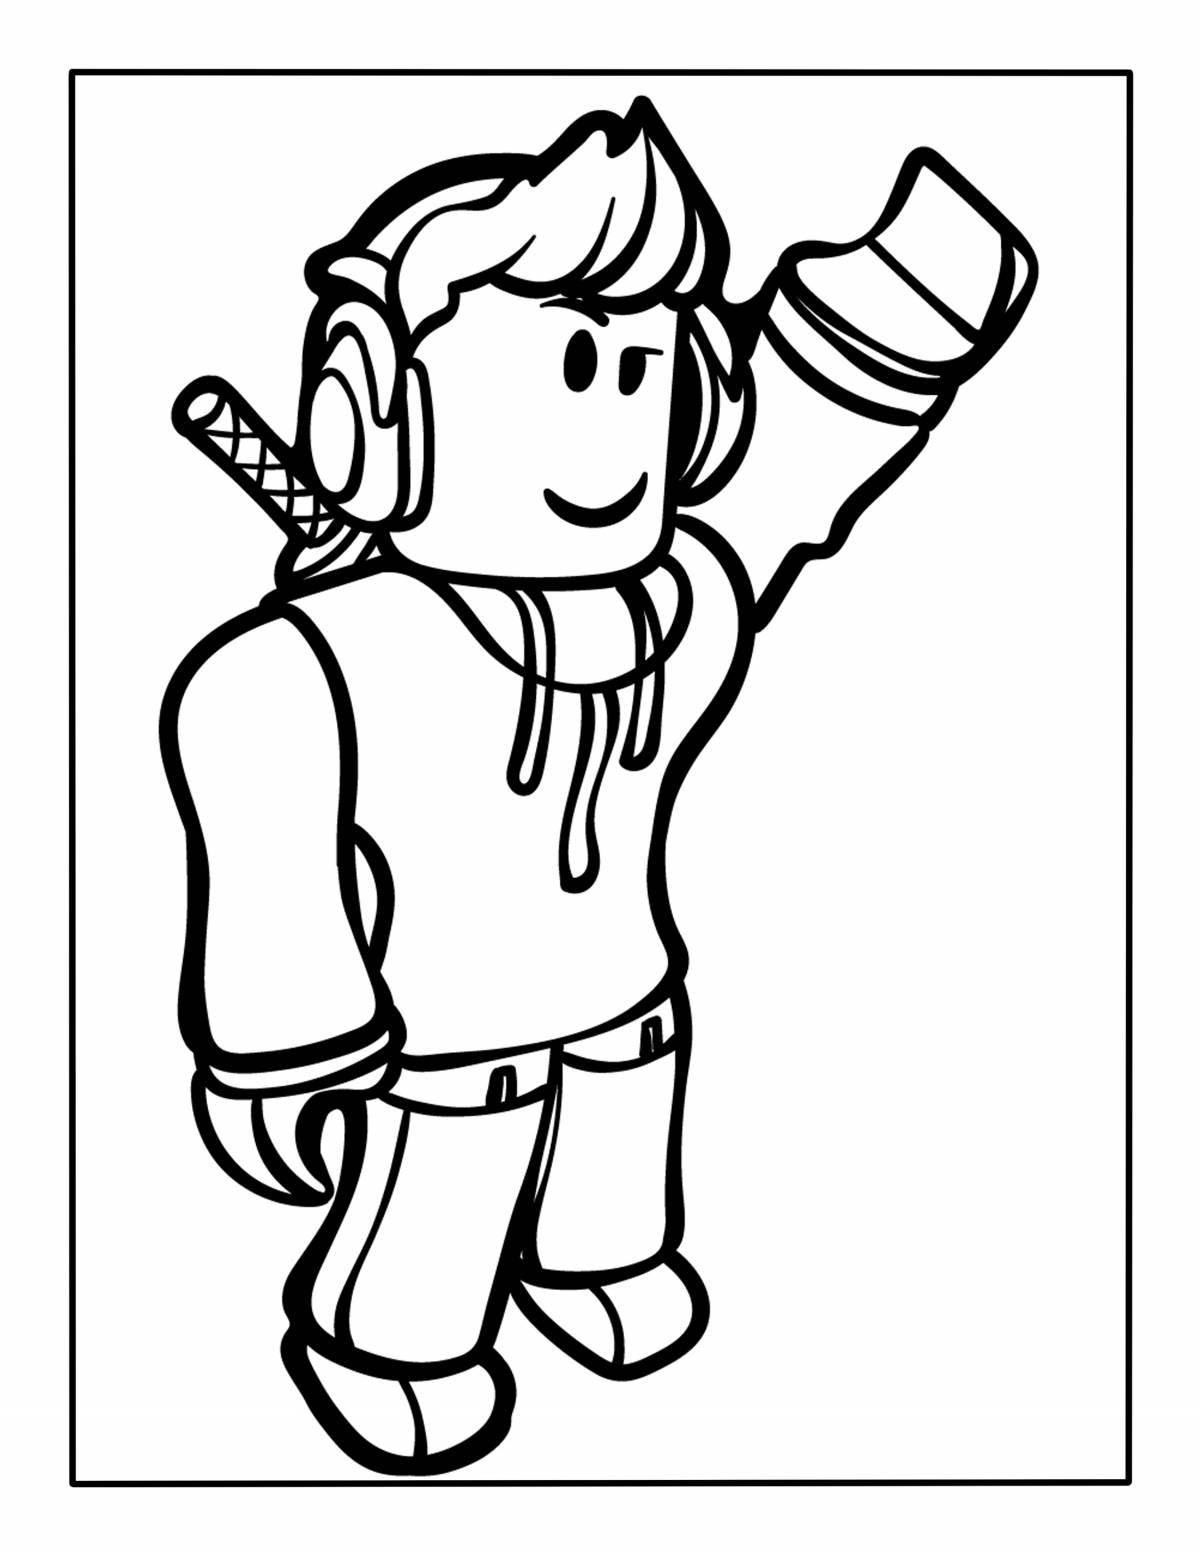 Colorful roblox ler4eg coloring page